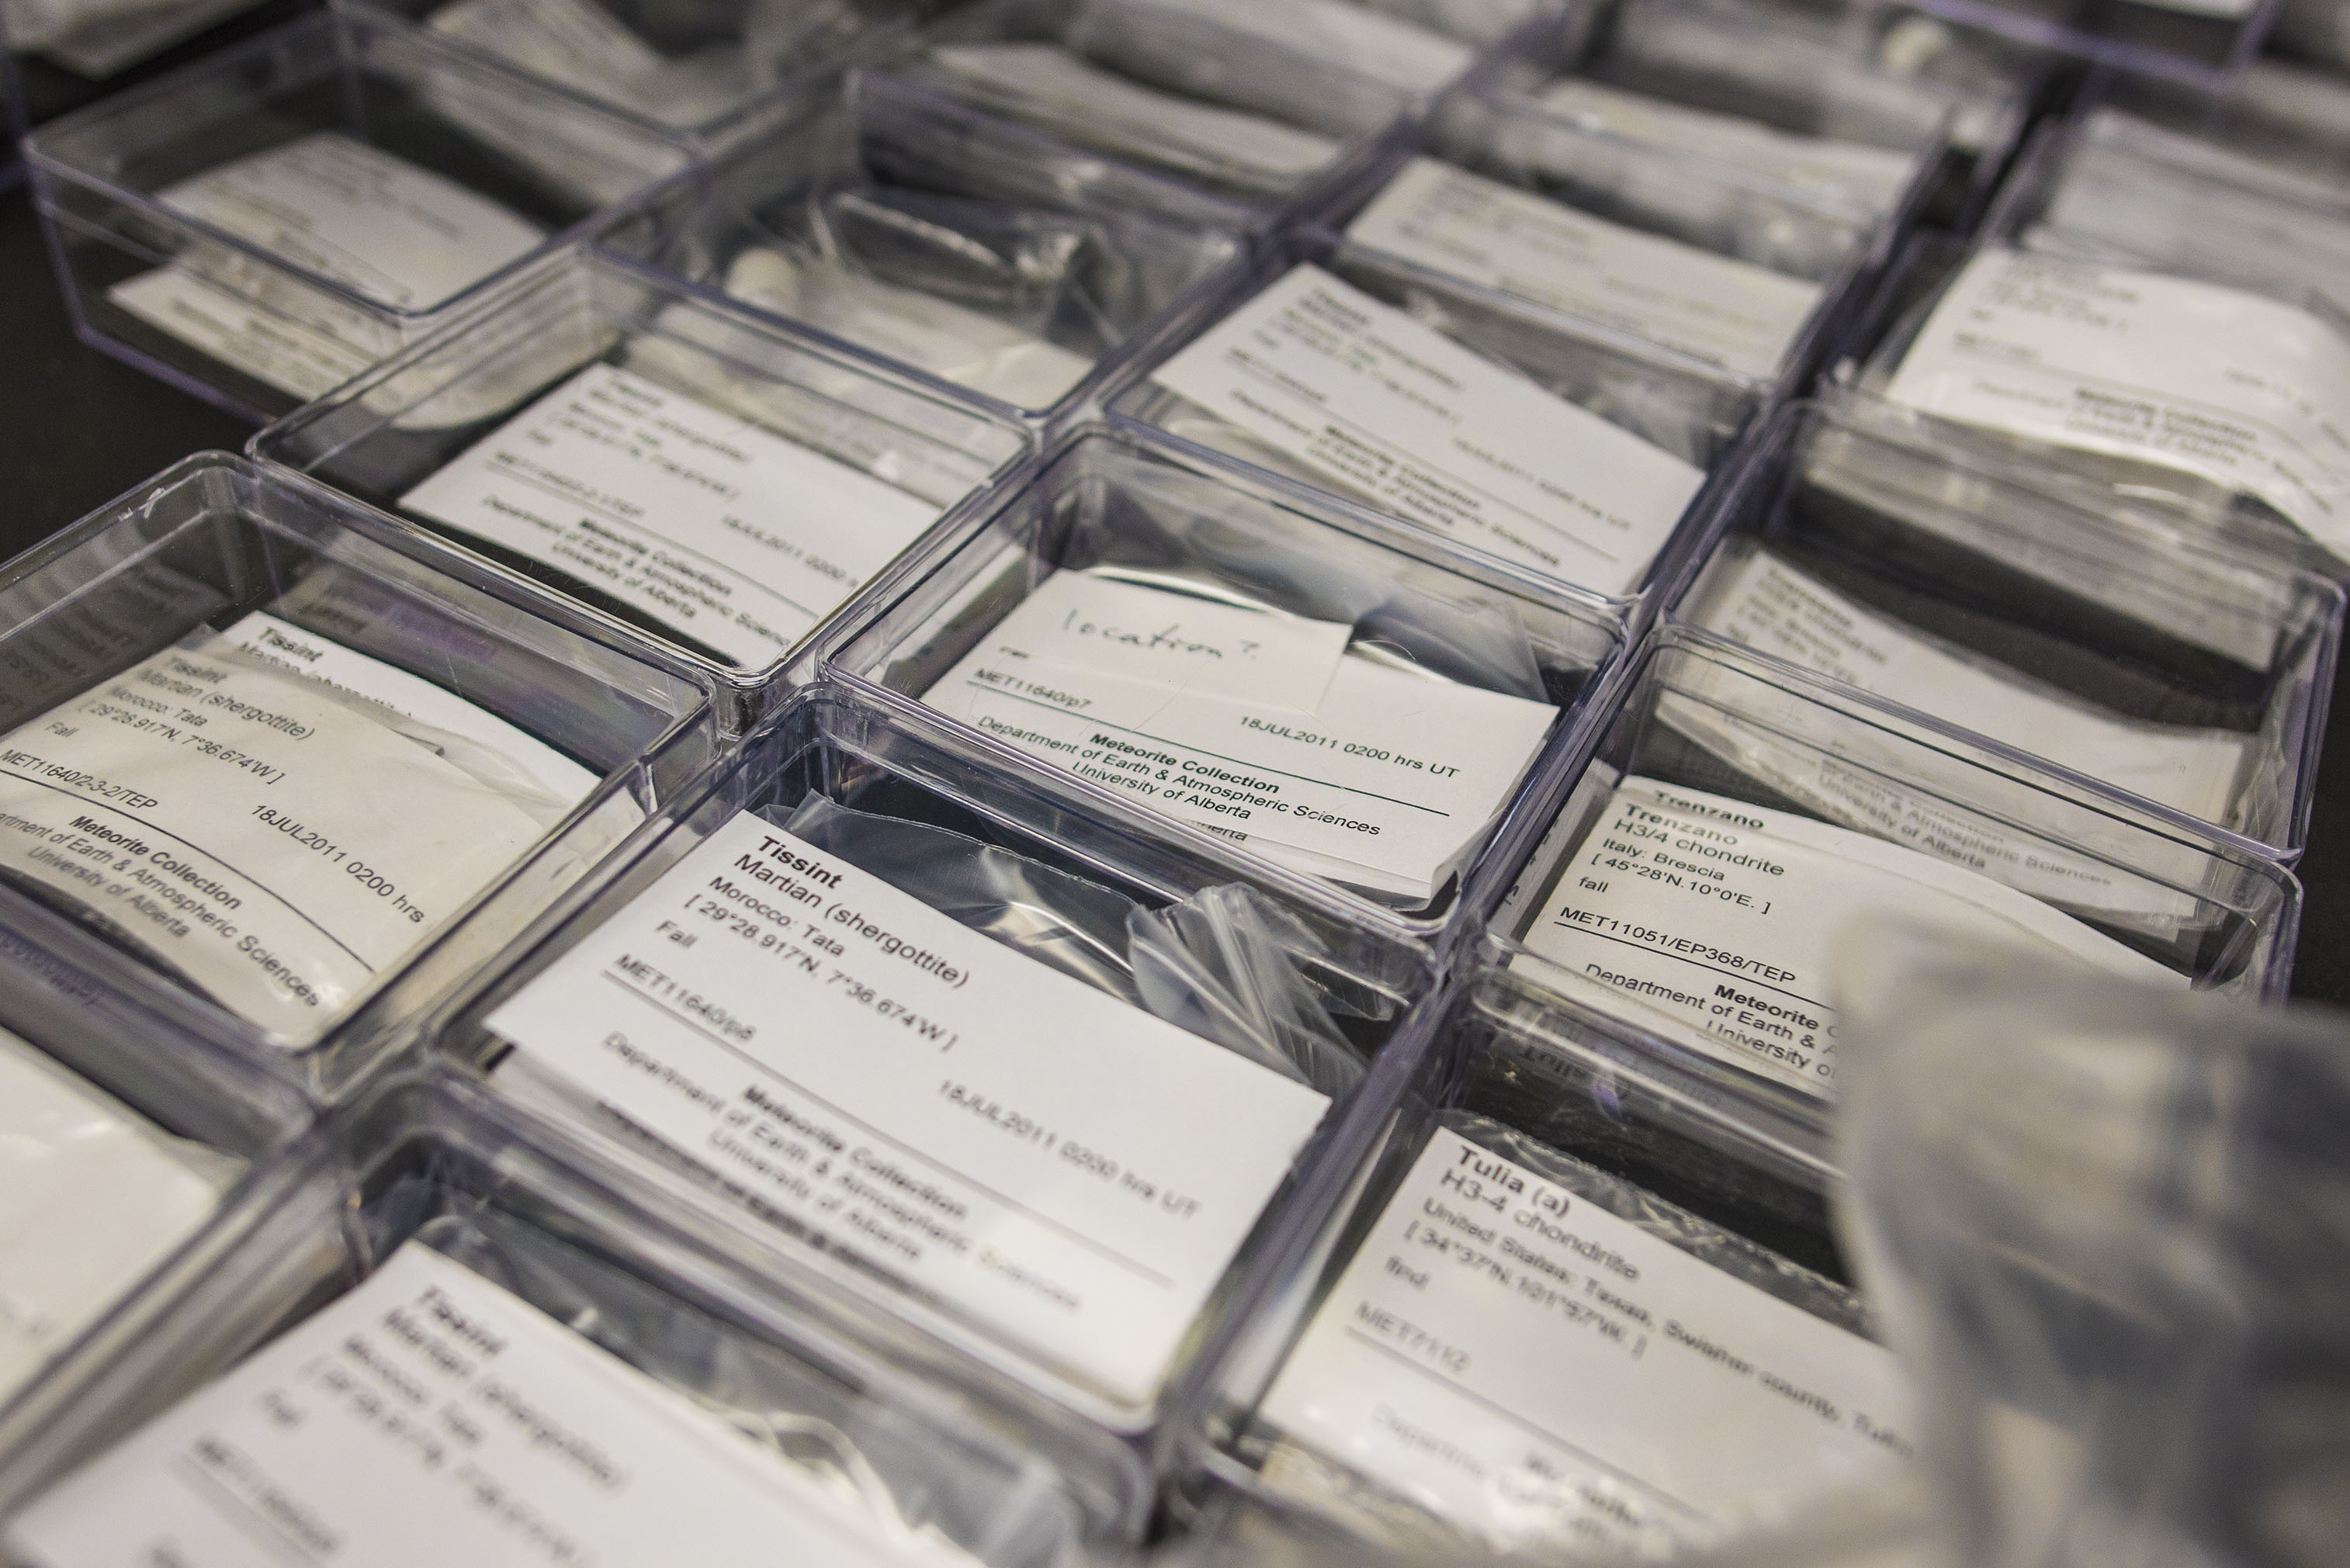 Rows of clear plastic contains with small bags of meteorite specimens inside, covered by white identification cards.